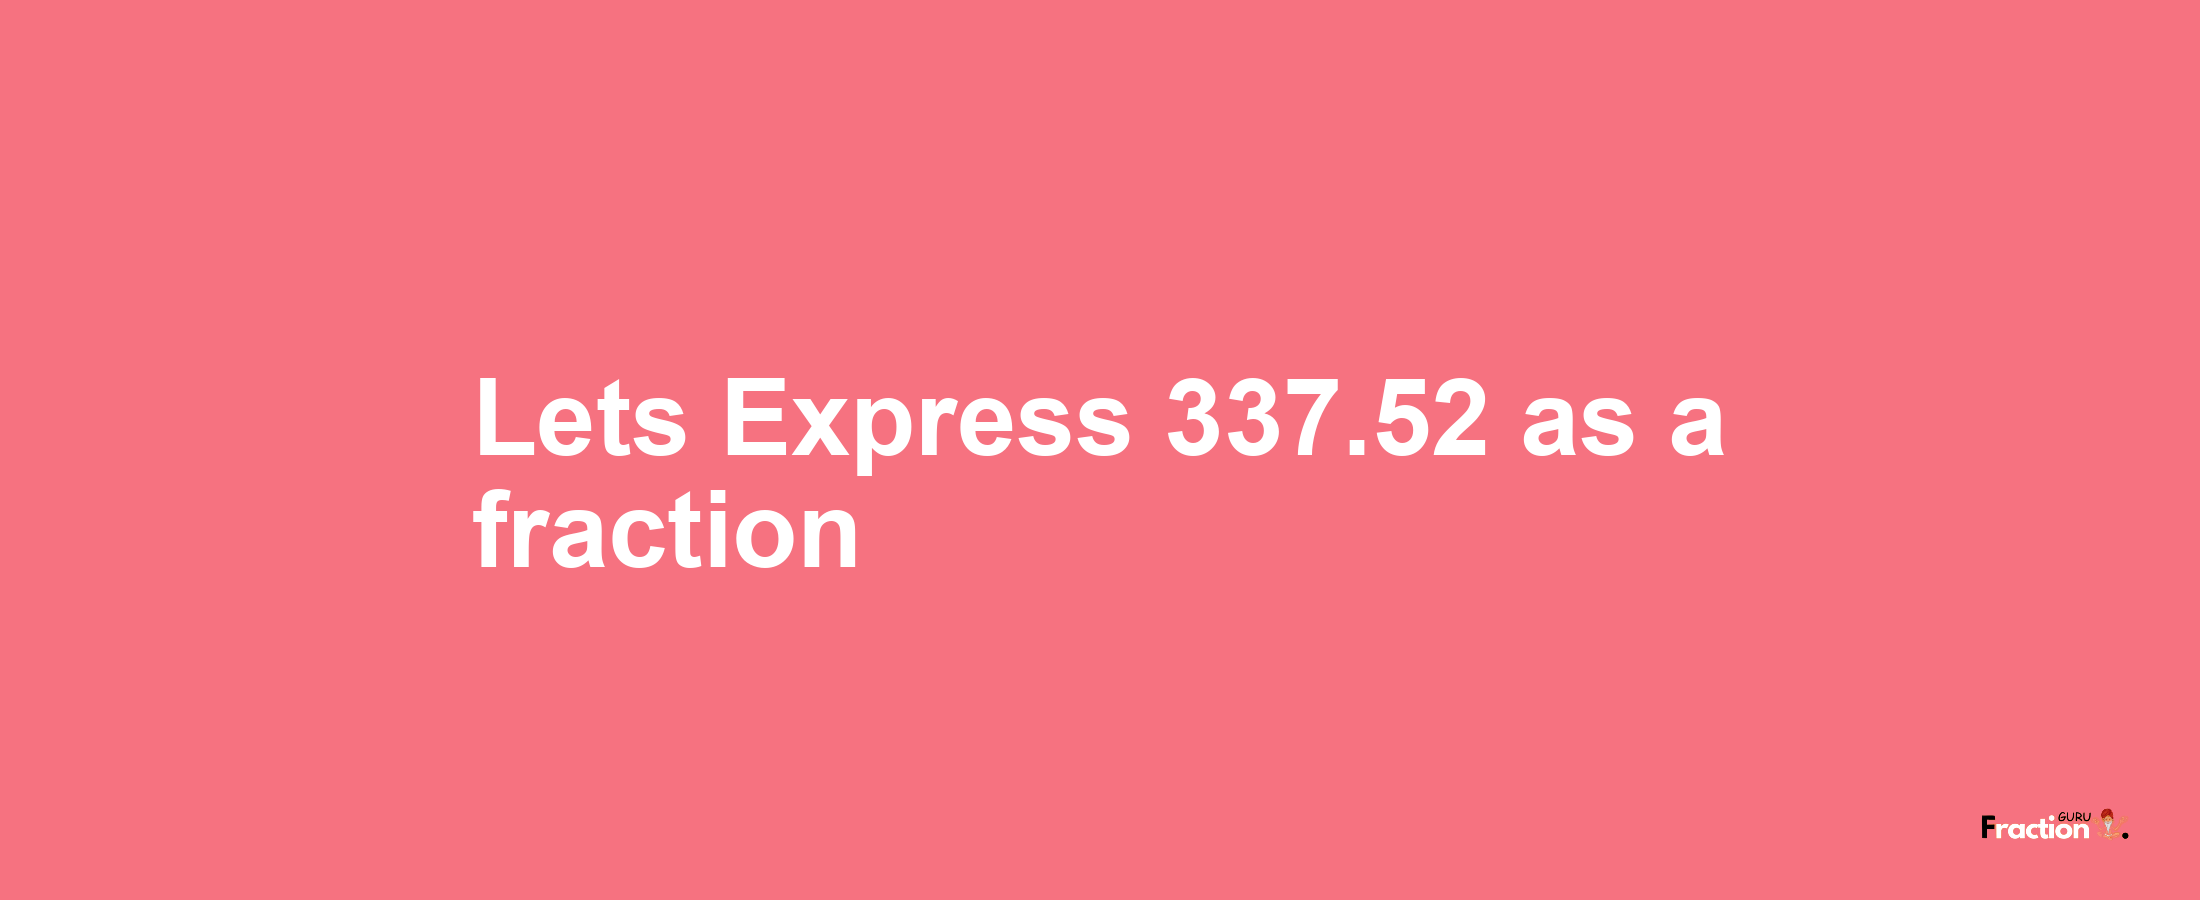 Lets Express 337.52 as afraction